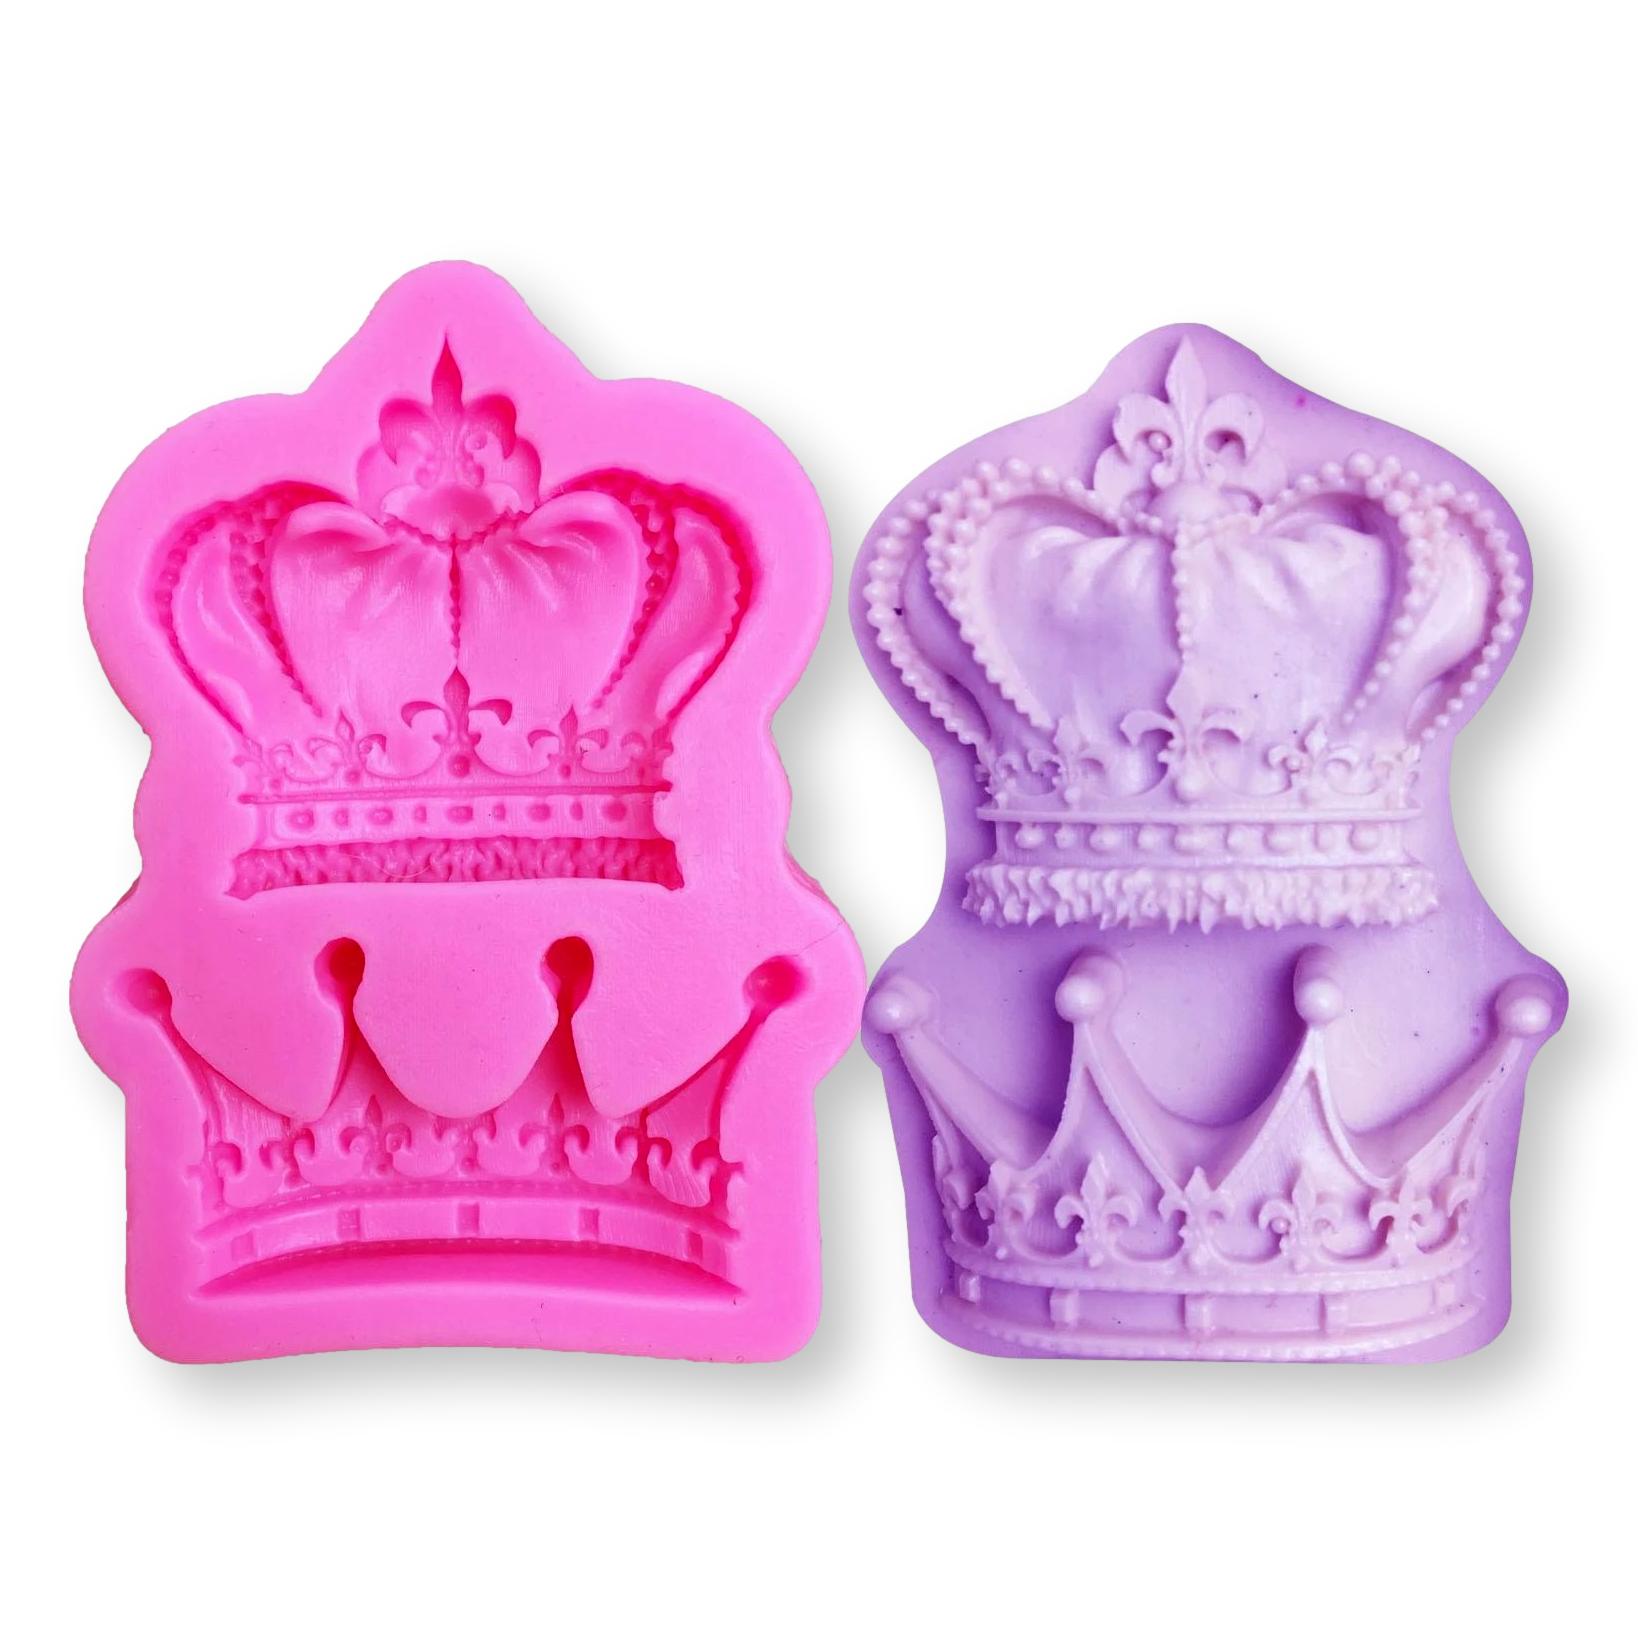 Royal-Crown-Silicone-Mold_clipped_rev_1